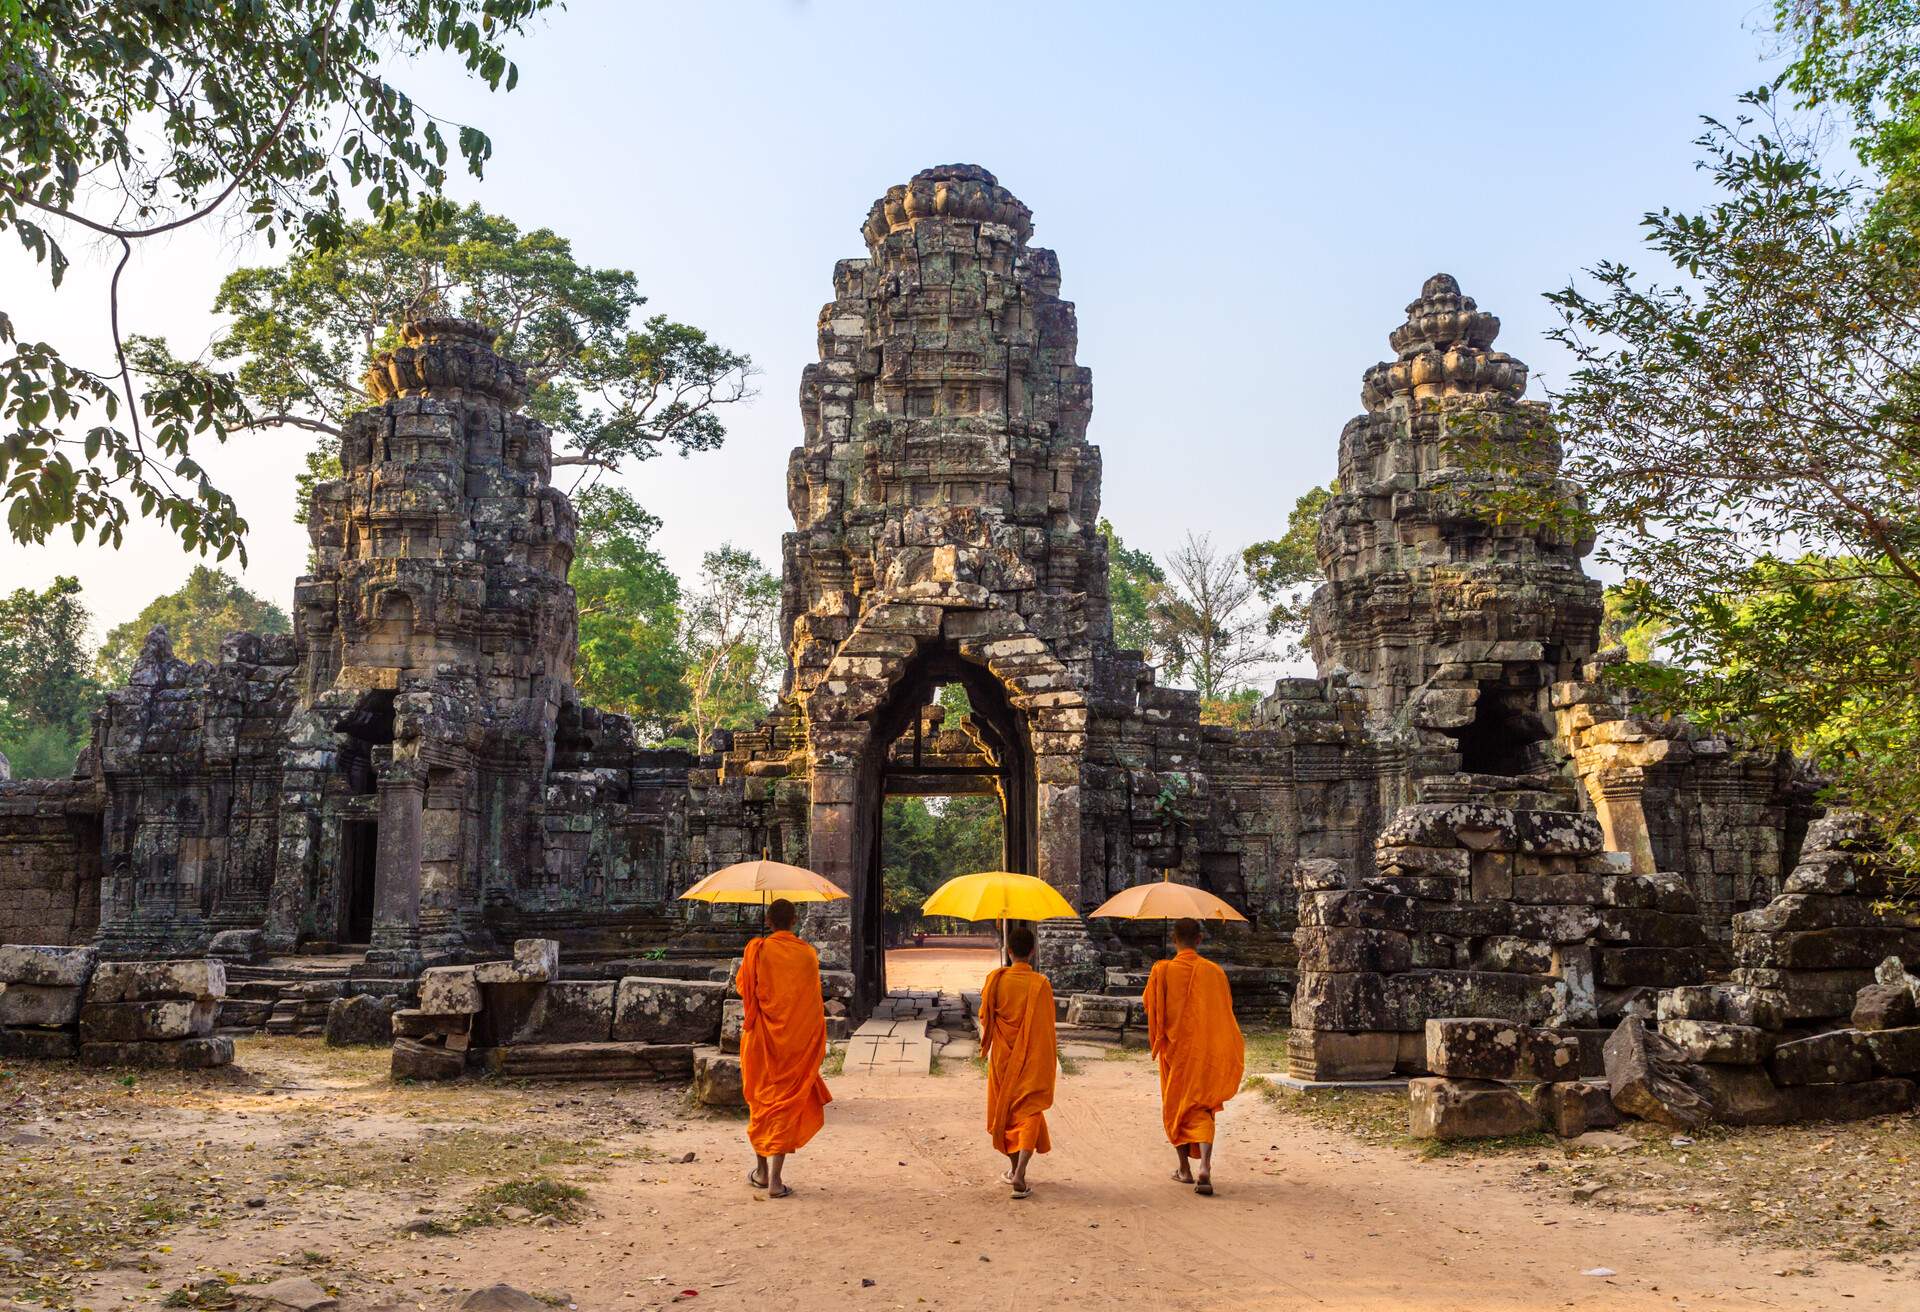 Three Buddhist monks, sheltered by their umbrellas, gracefully traverse the historic stone gate entrance of the majestic Angkor Wat temple complex.